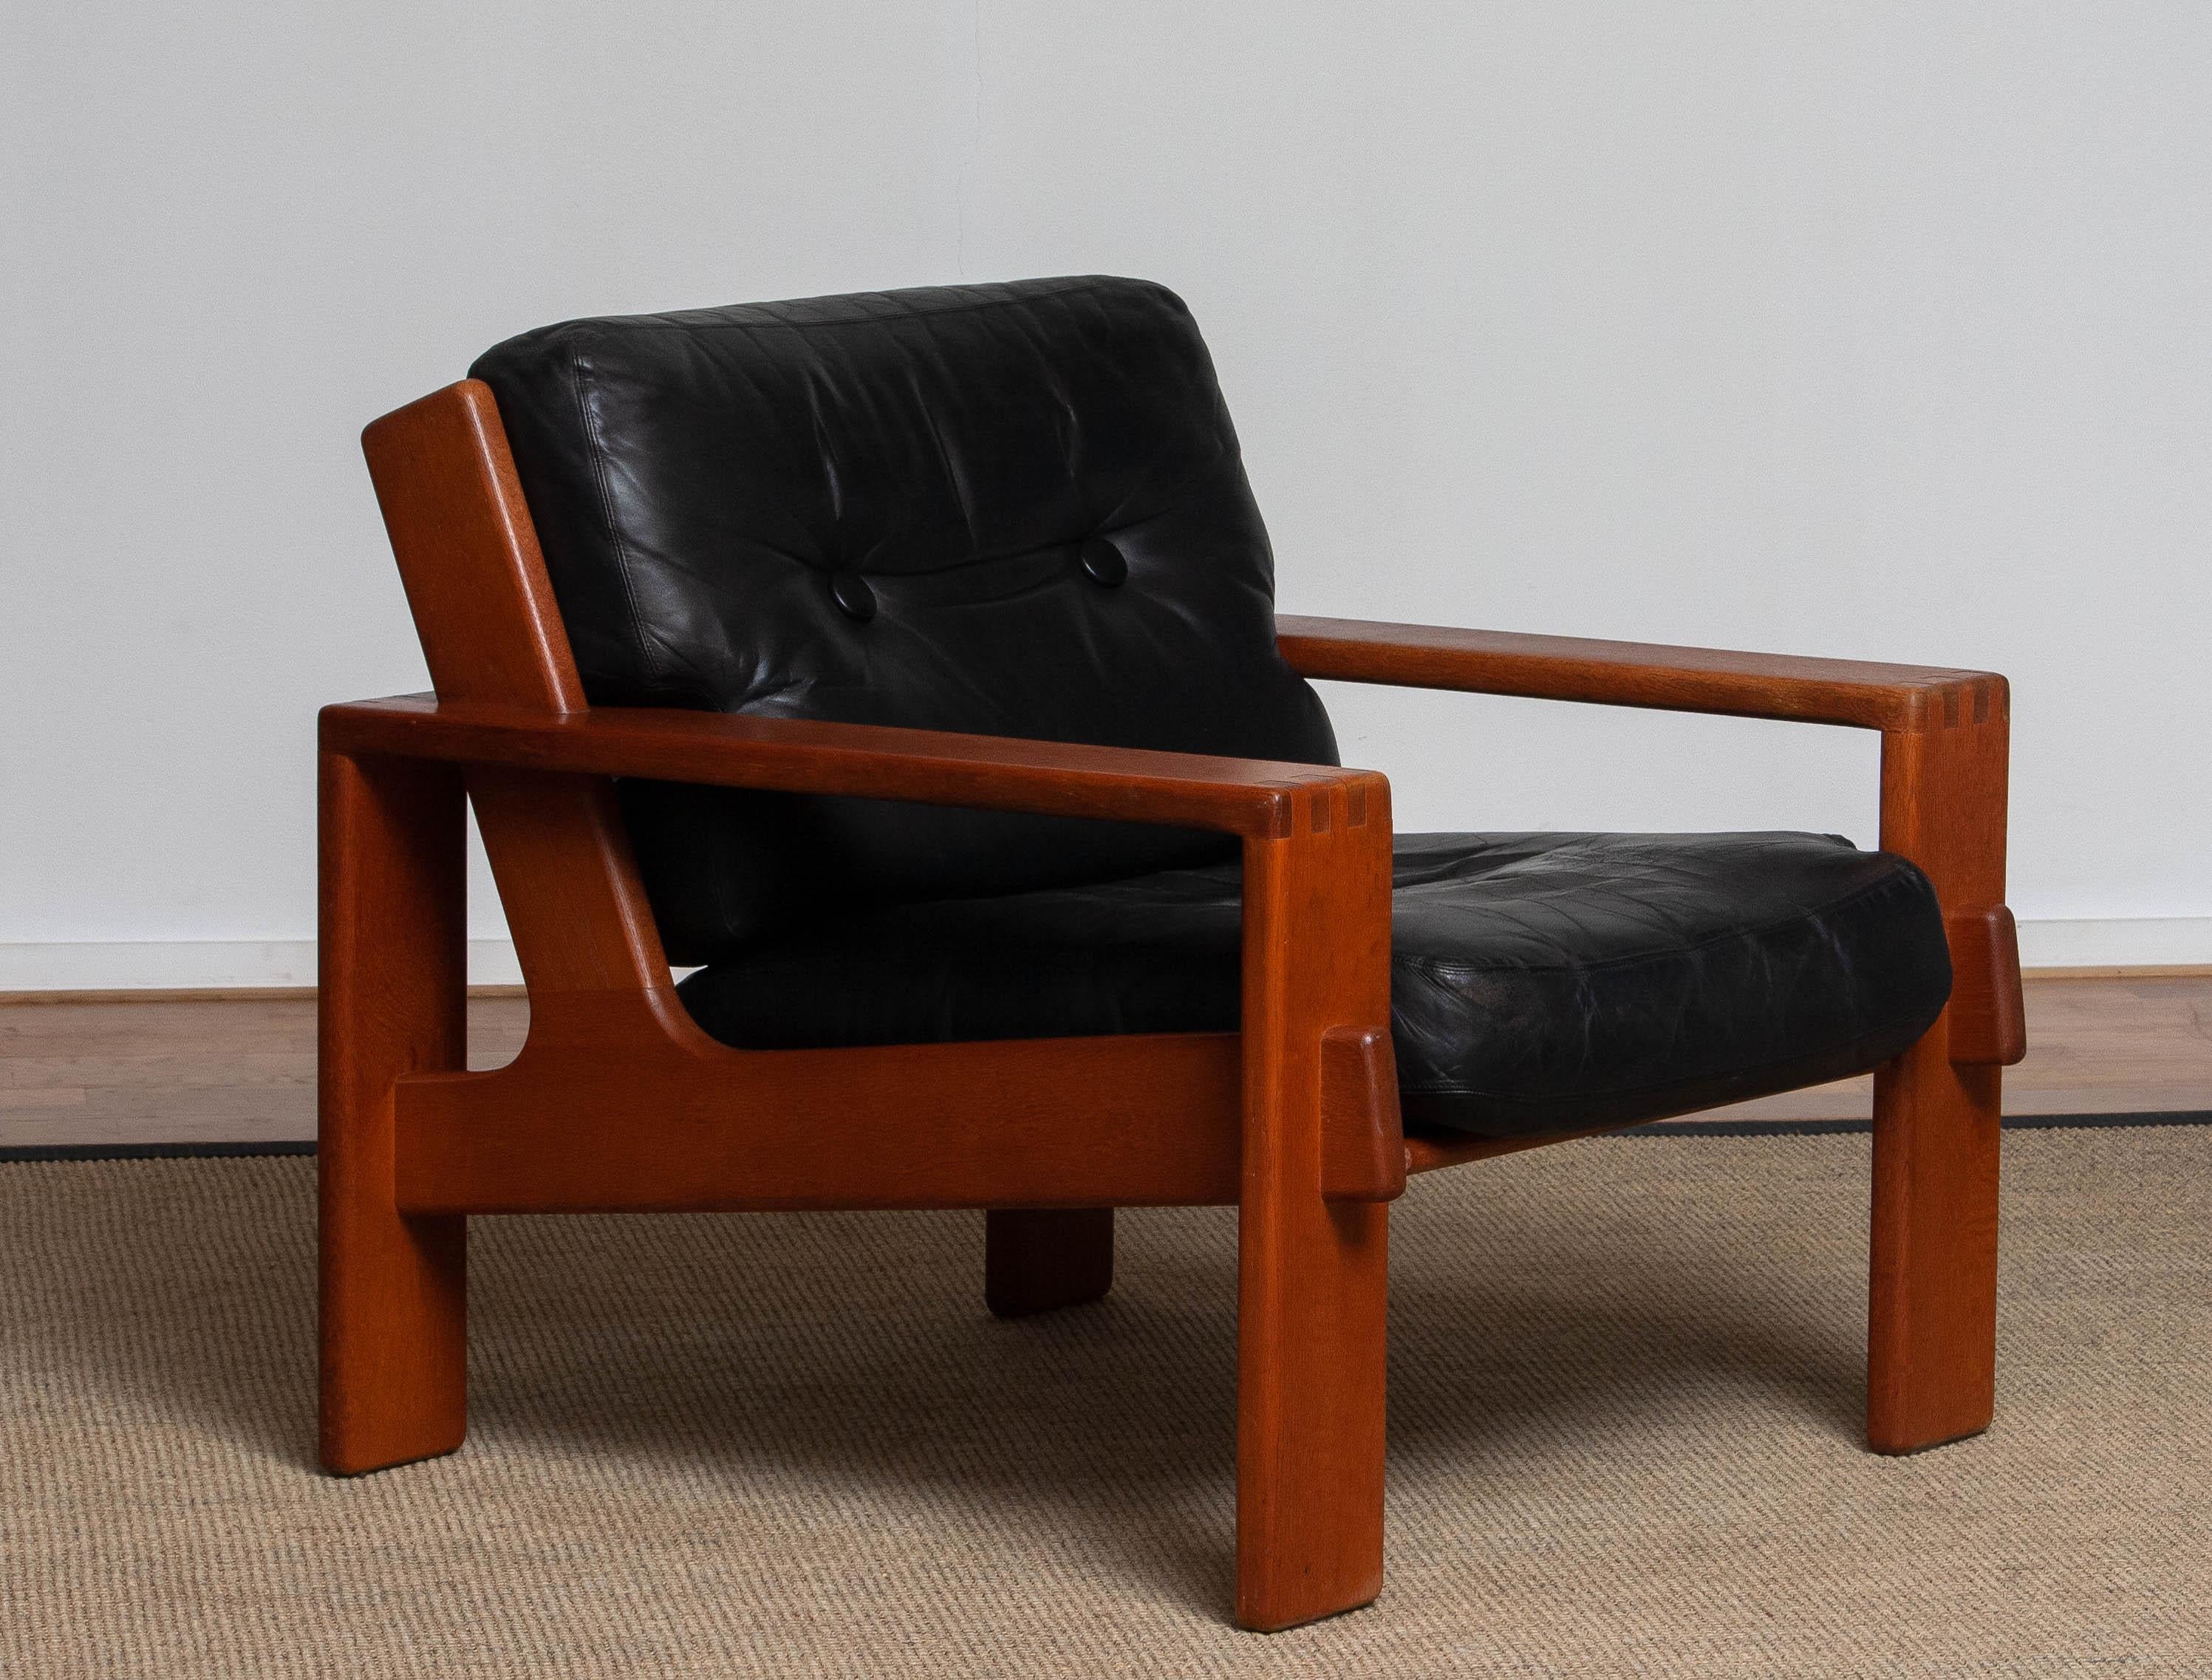 1960s, Teak and Black Leather Cubist Lounge Chair by Esko Pajamies for Asko In Good Condition In Silvolde, Gelderland